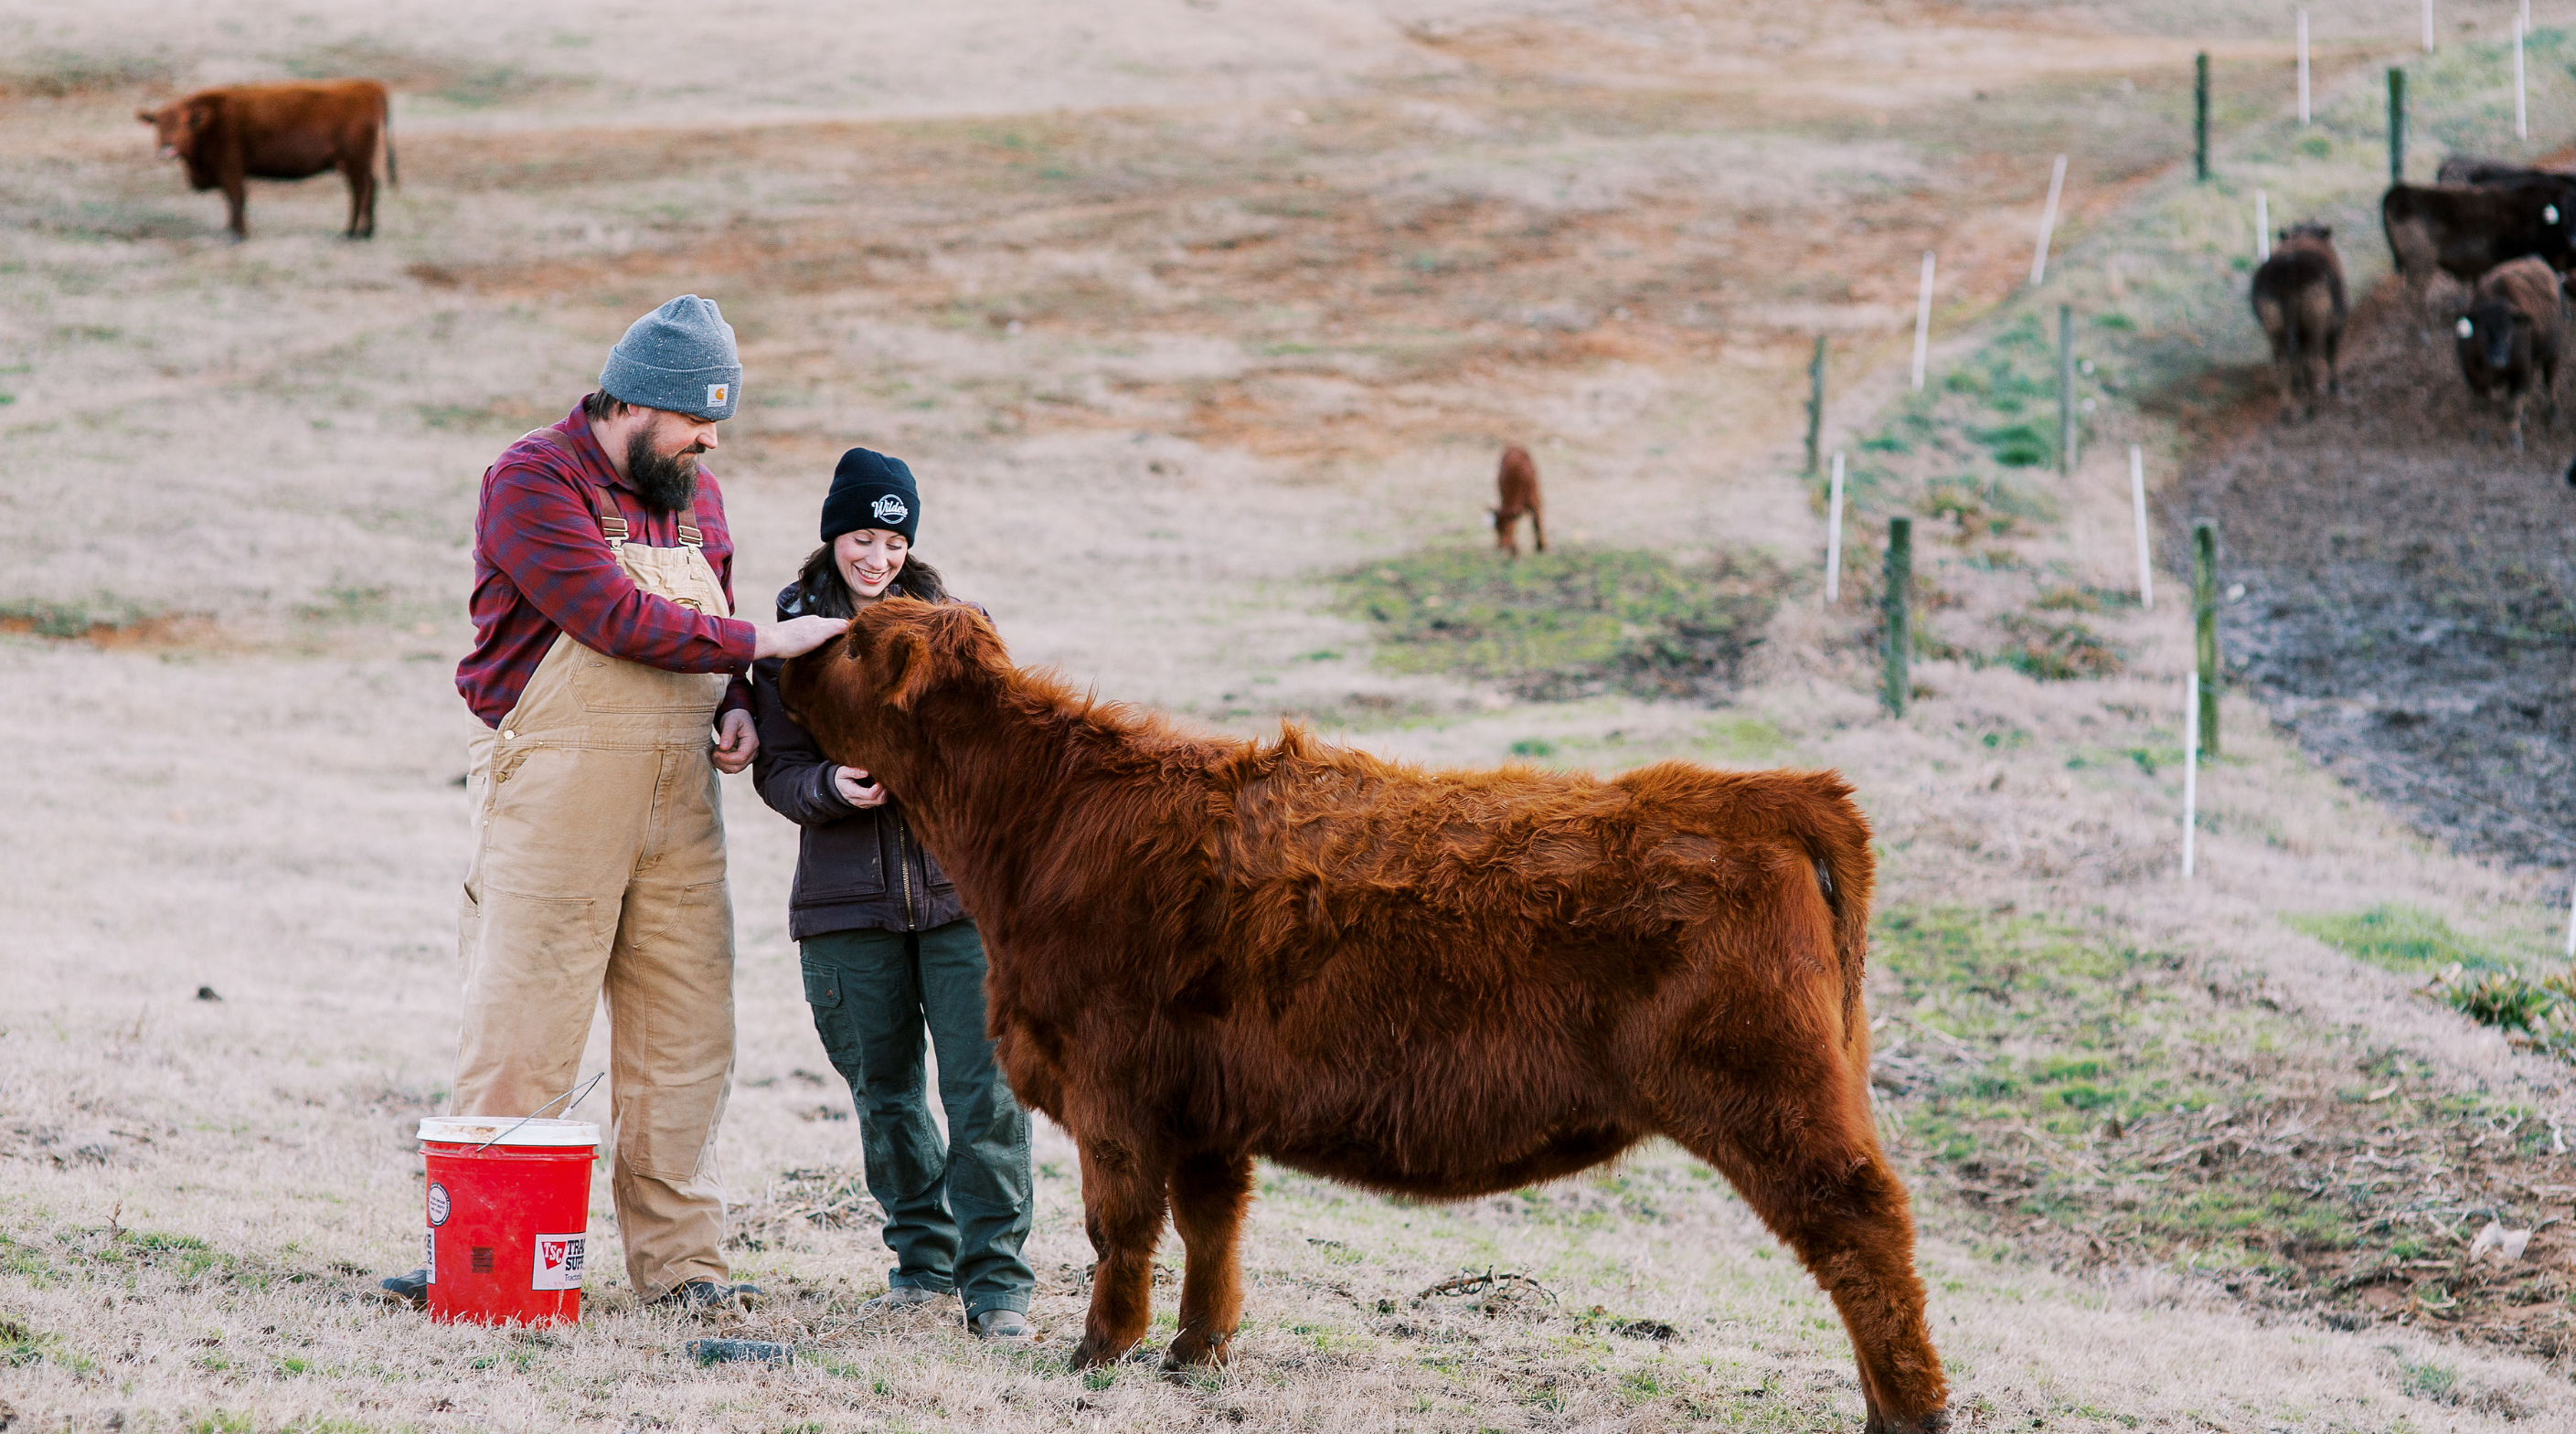 Wilders Farmers Reid and Jacklyn petting a cow at the farm